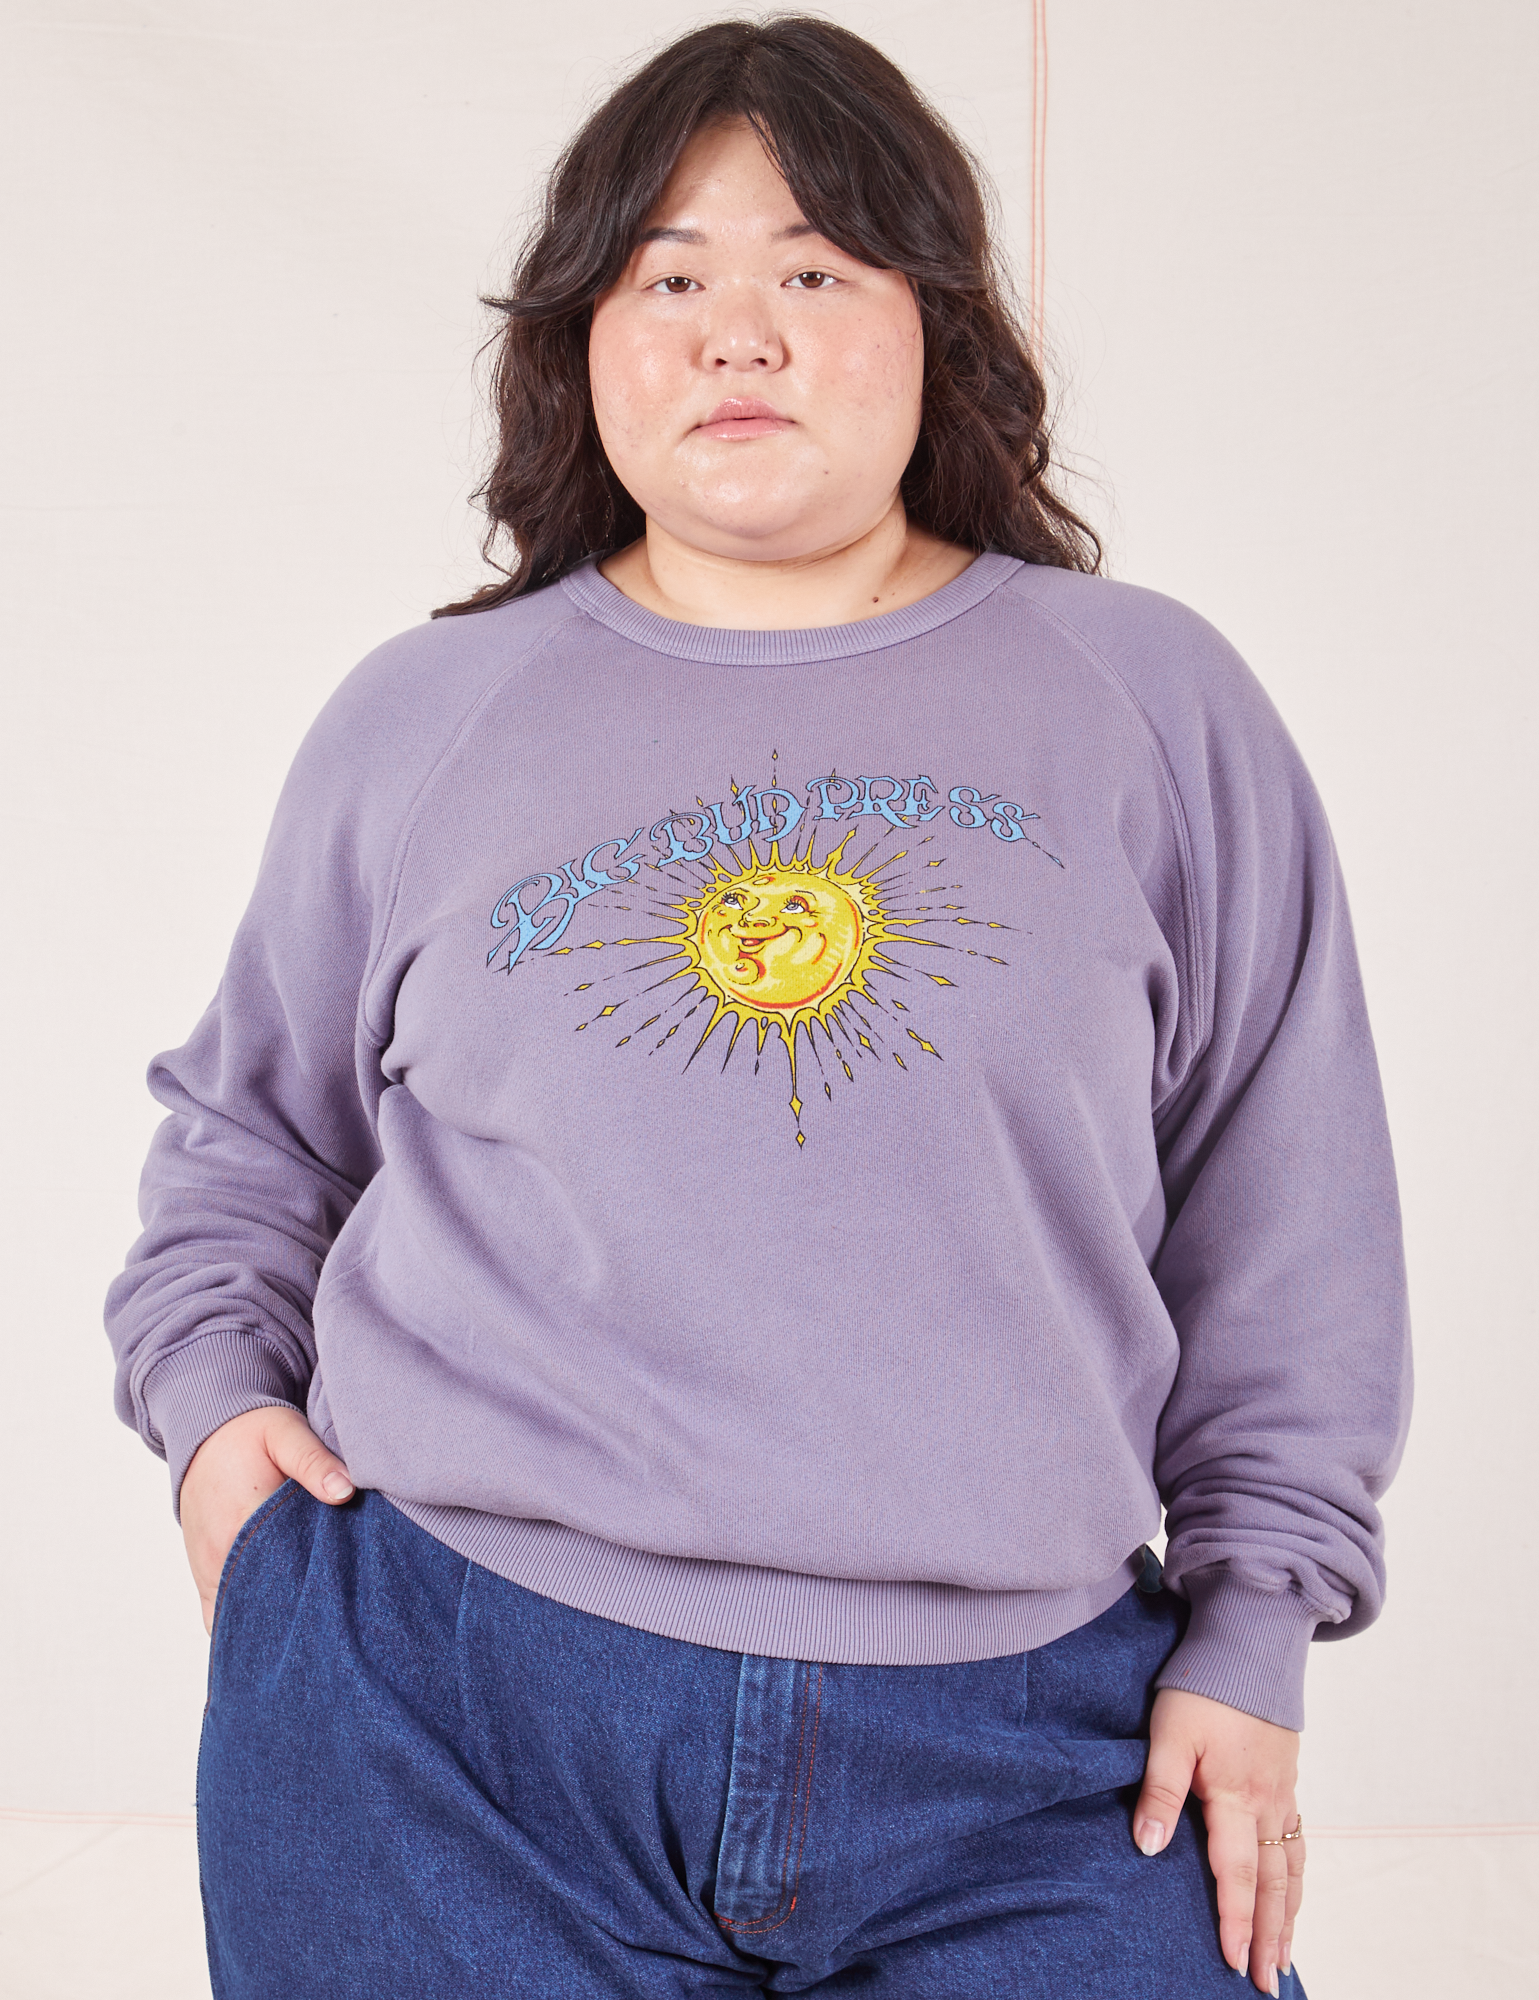 Ashely is 5&#39;7&quot; and wearing XL Bill Ogden&#39;s Sun Baby Crew in Faded Grape